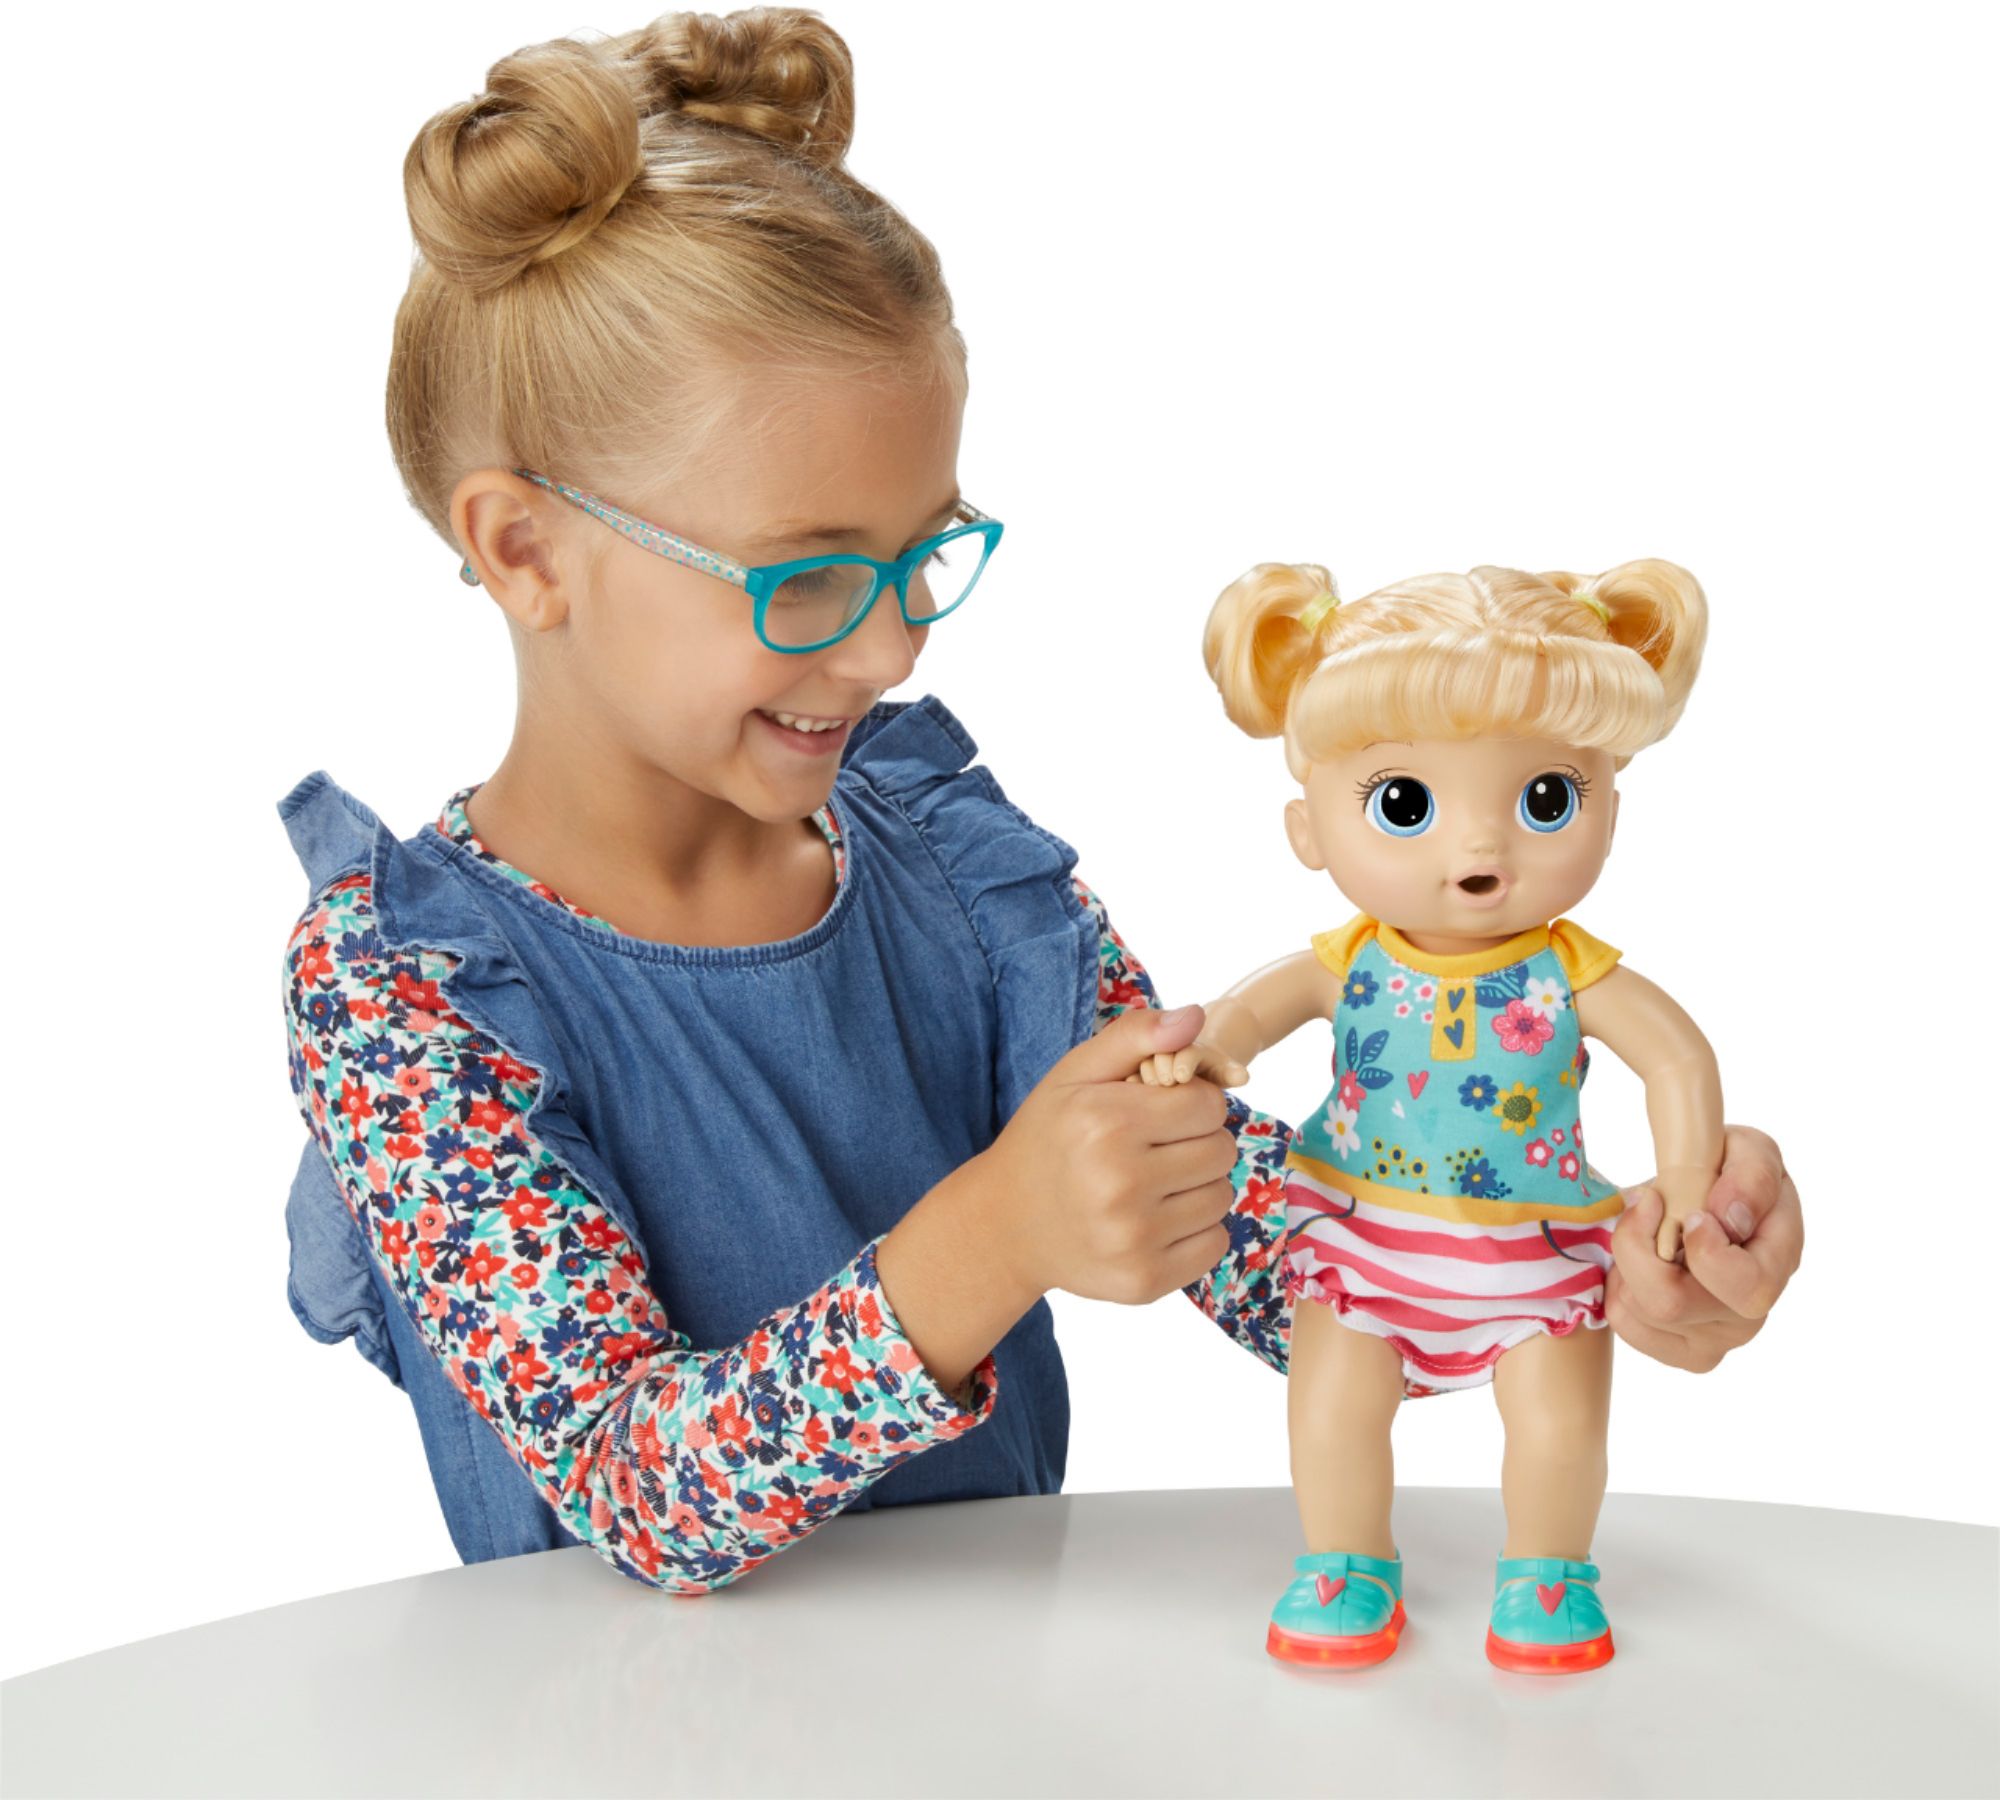 Baby Alive Plays And Giggles Blonde Baby Doll Talking New 